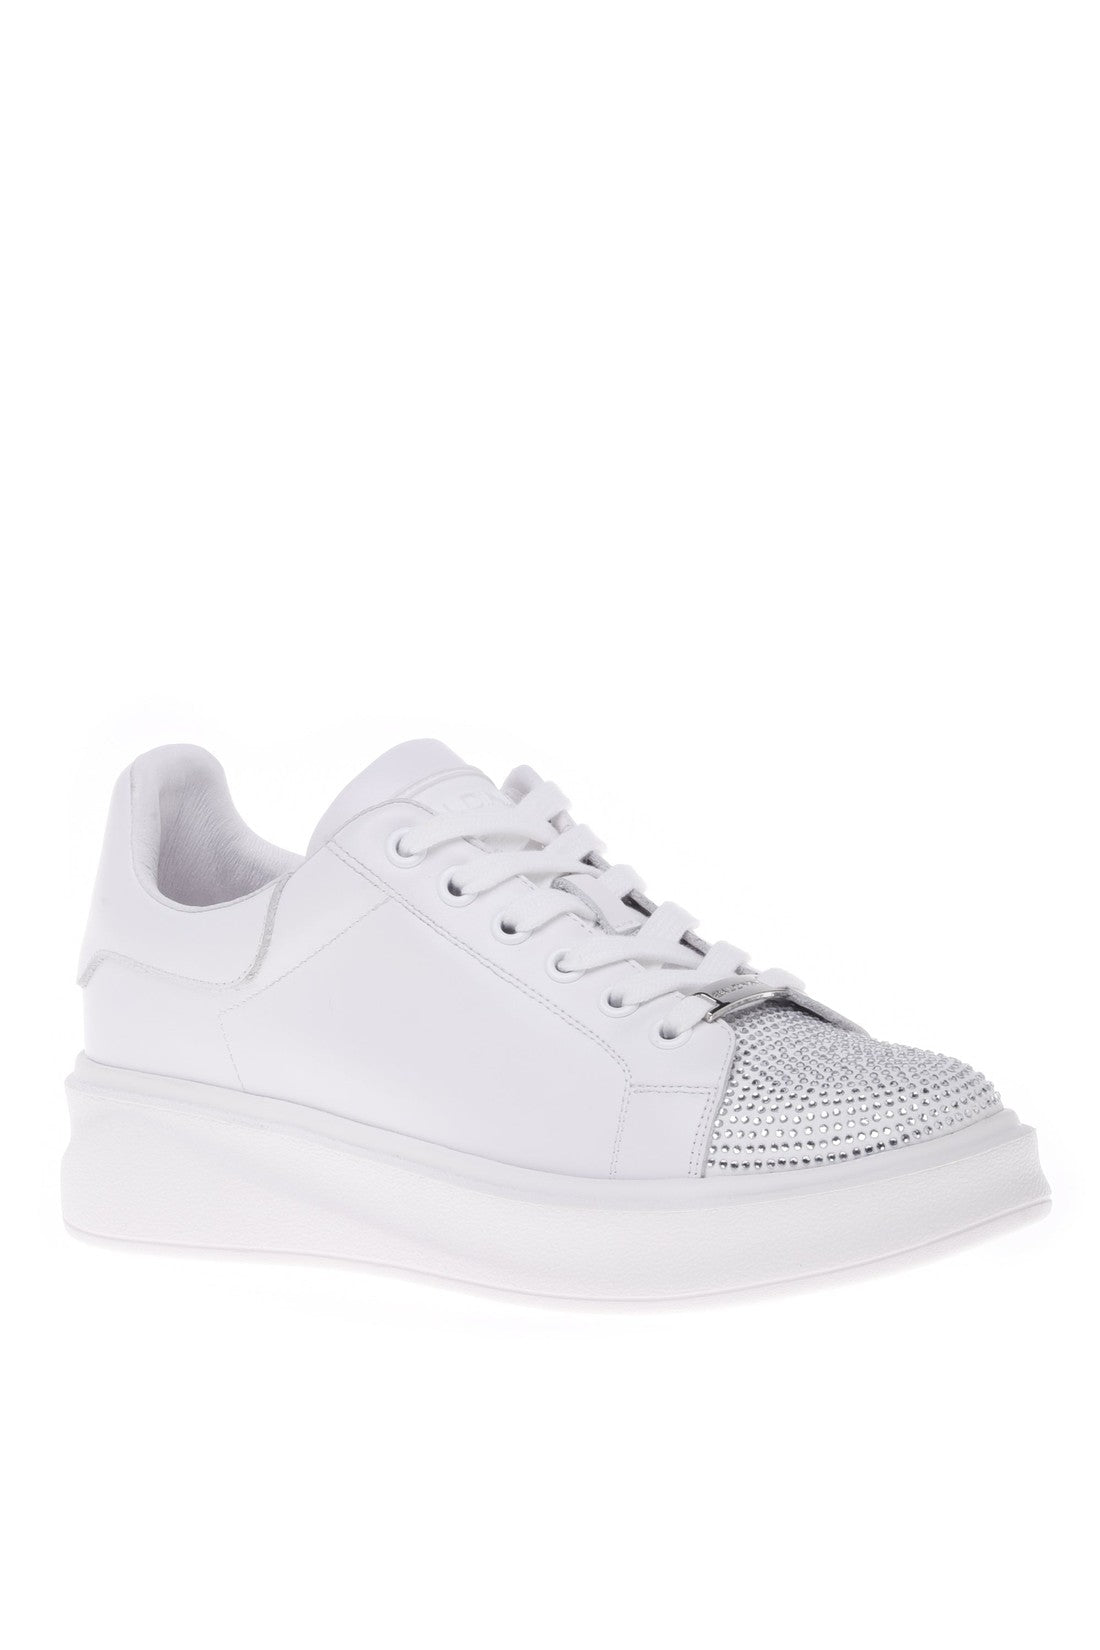 BALDININI-OUTLET-SALE-Sneaker-in-white-calfskin-with-rhinestones-Sneaker-35-ARCHIVE-COLLECTION.jpg